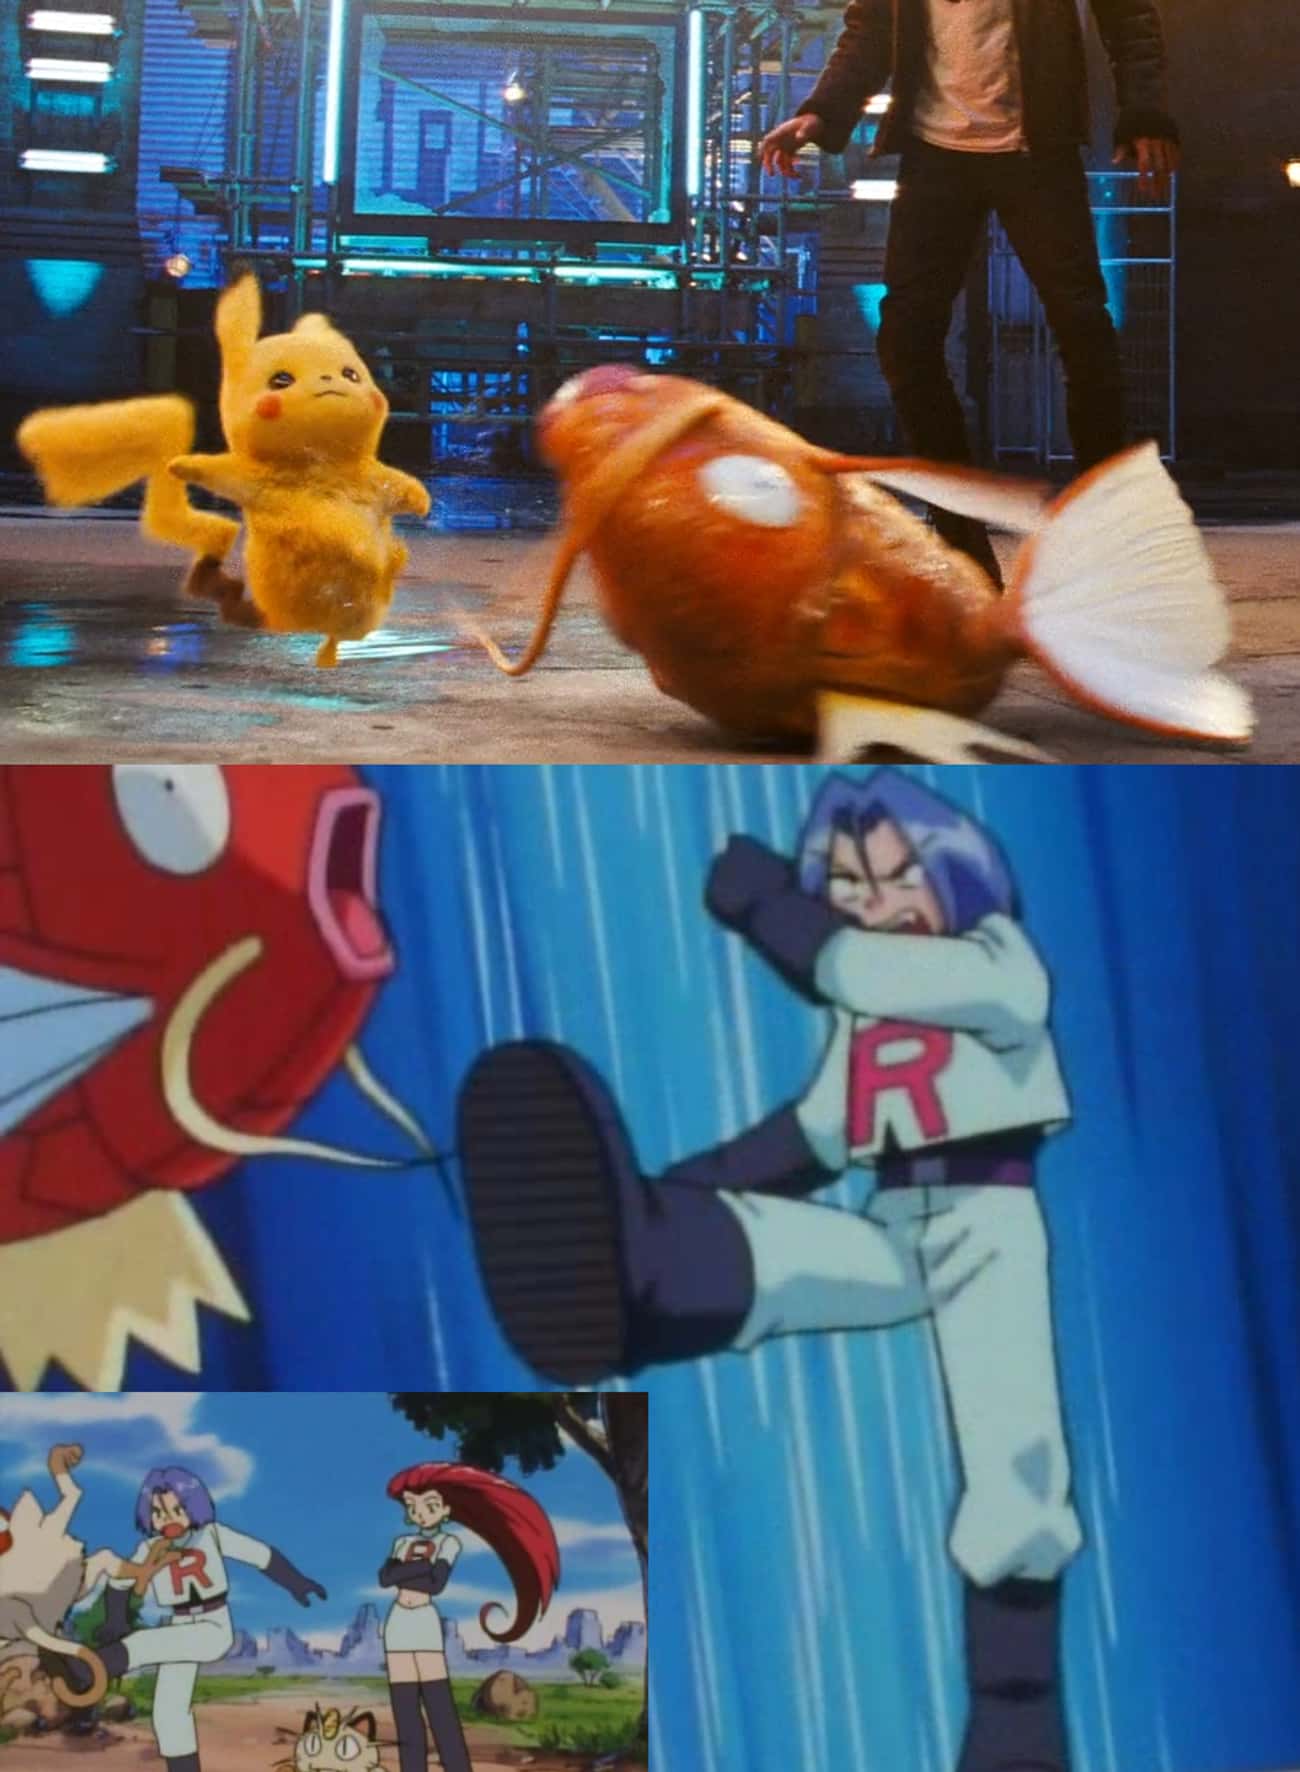 The Magikarp Evolution Is A Reference To The Anime